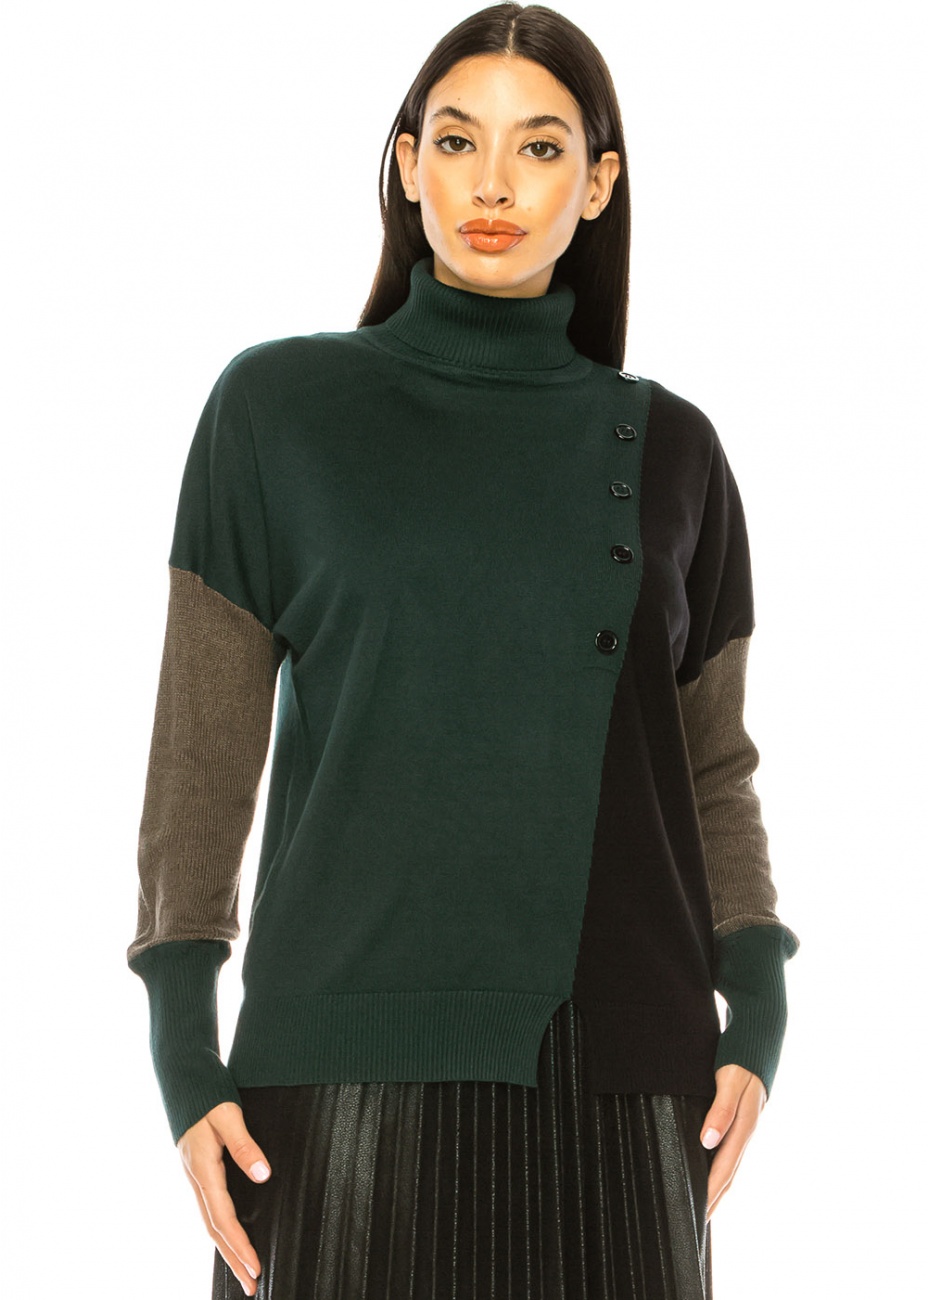 Green Hues: Color Block High Neck Sweater